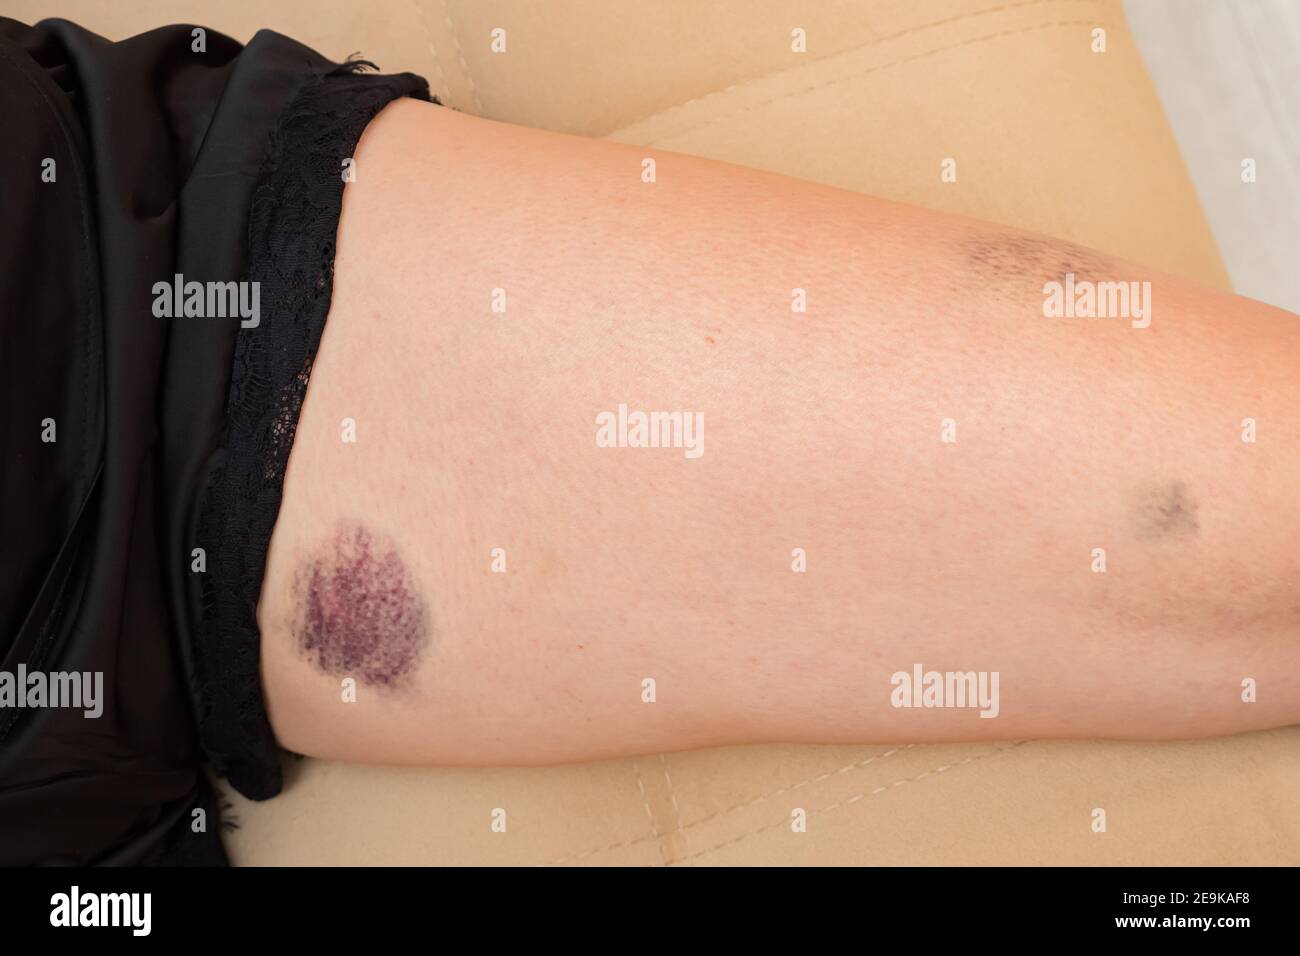 female leg with blue and pink bruise closeup Stock Photo